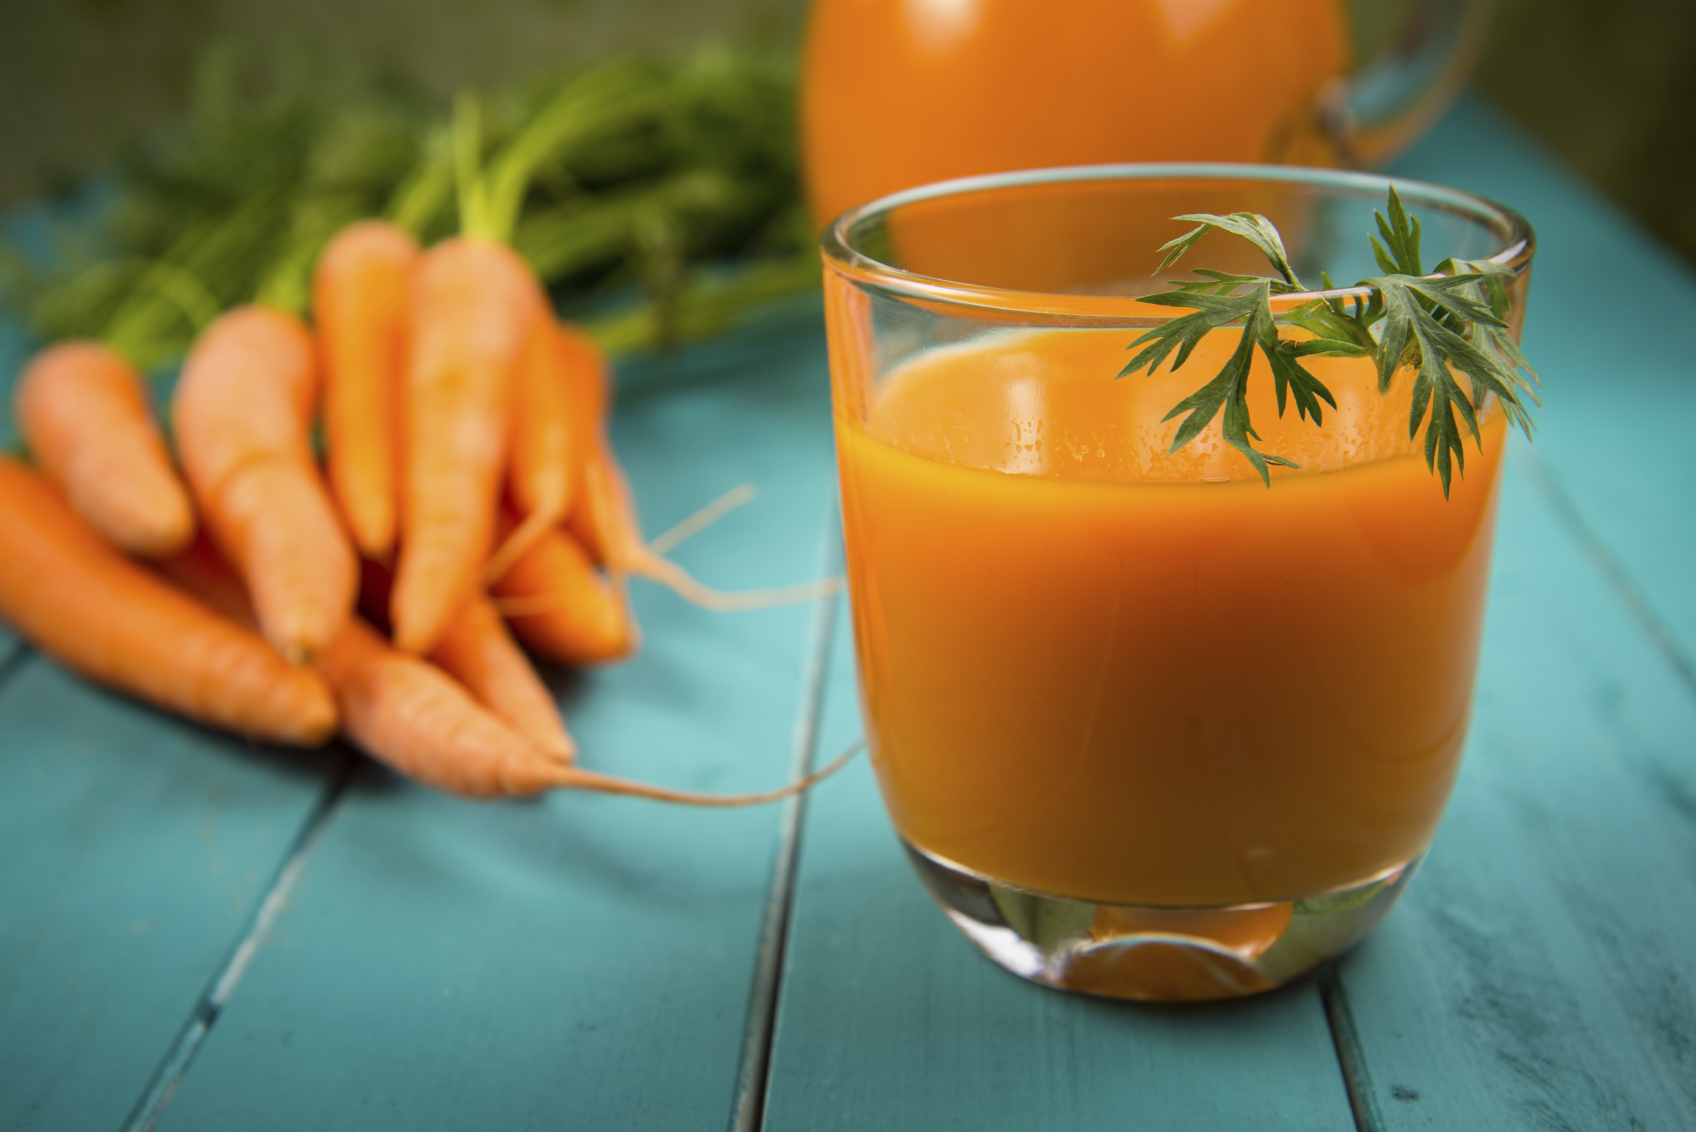 How Do You Make Carrot Juice Ingredients From Parepare City